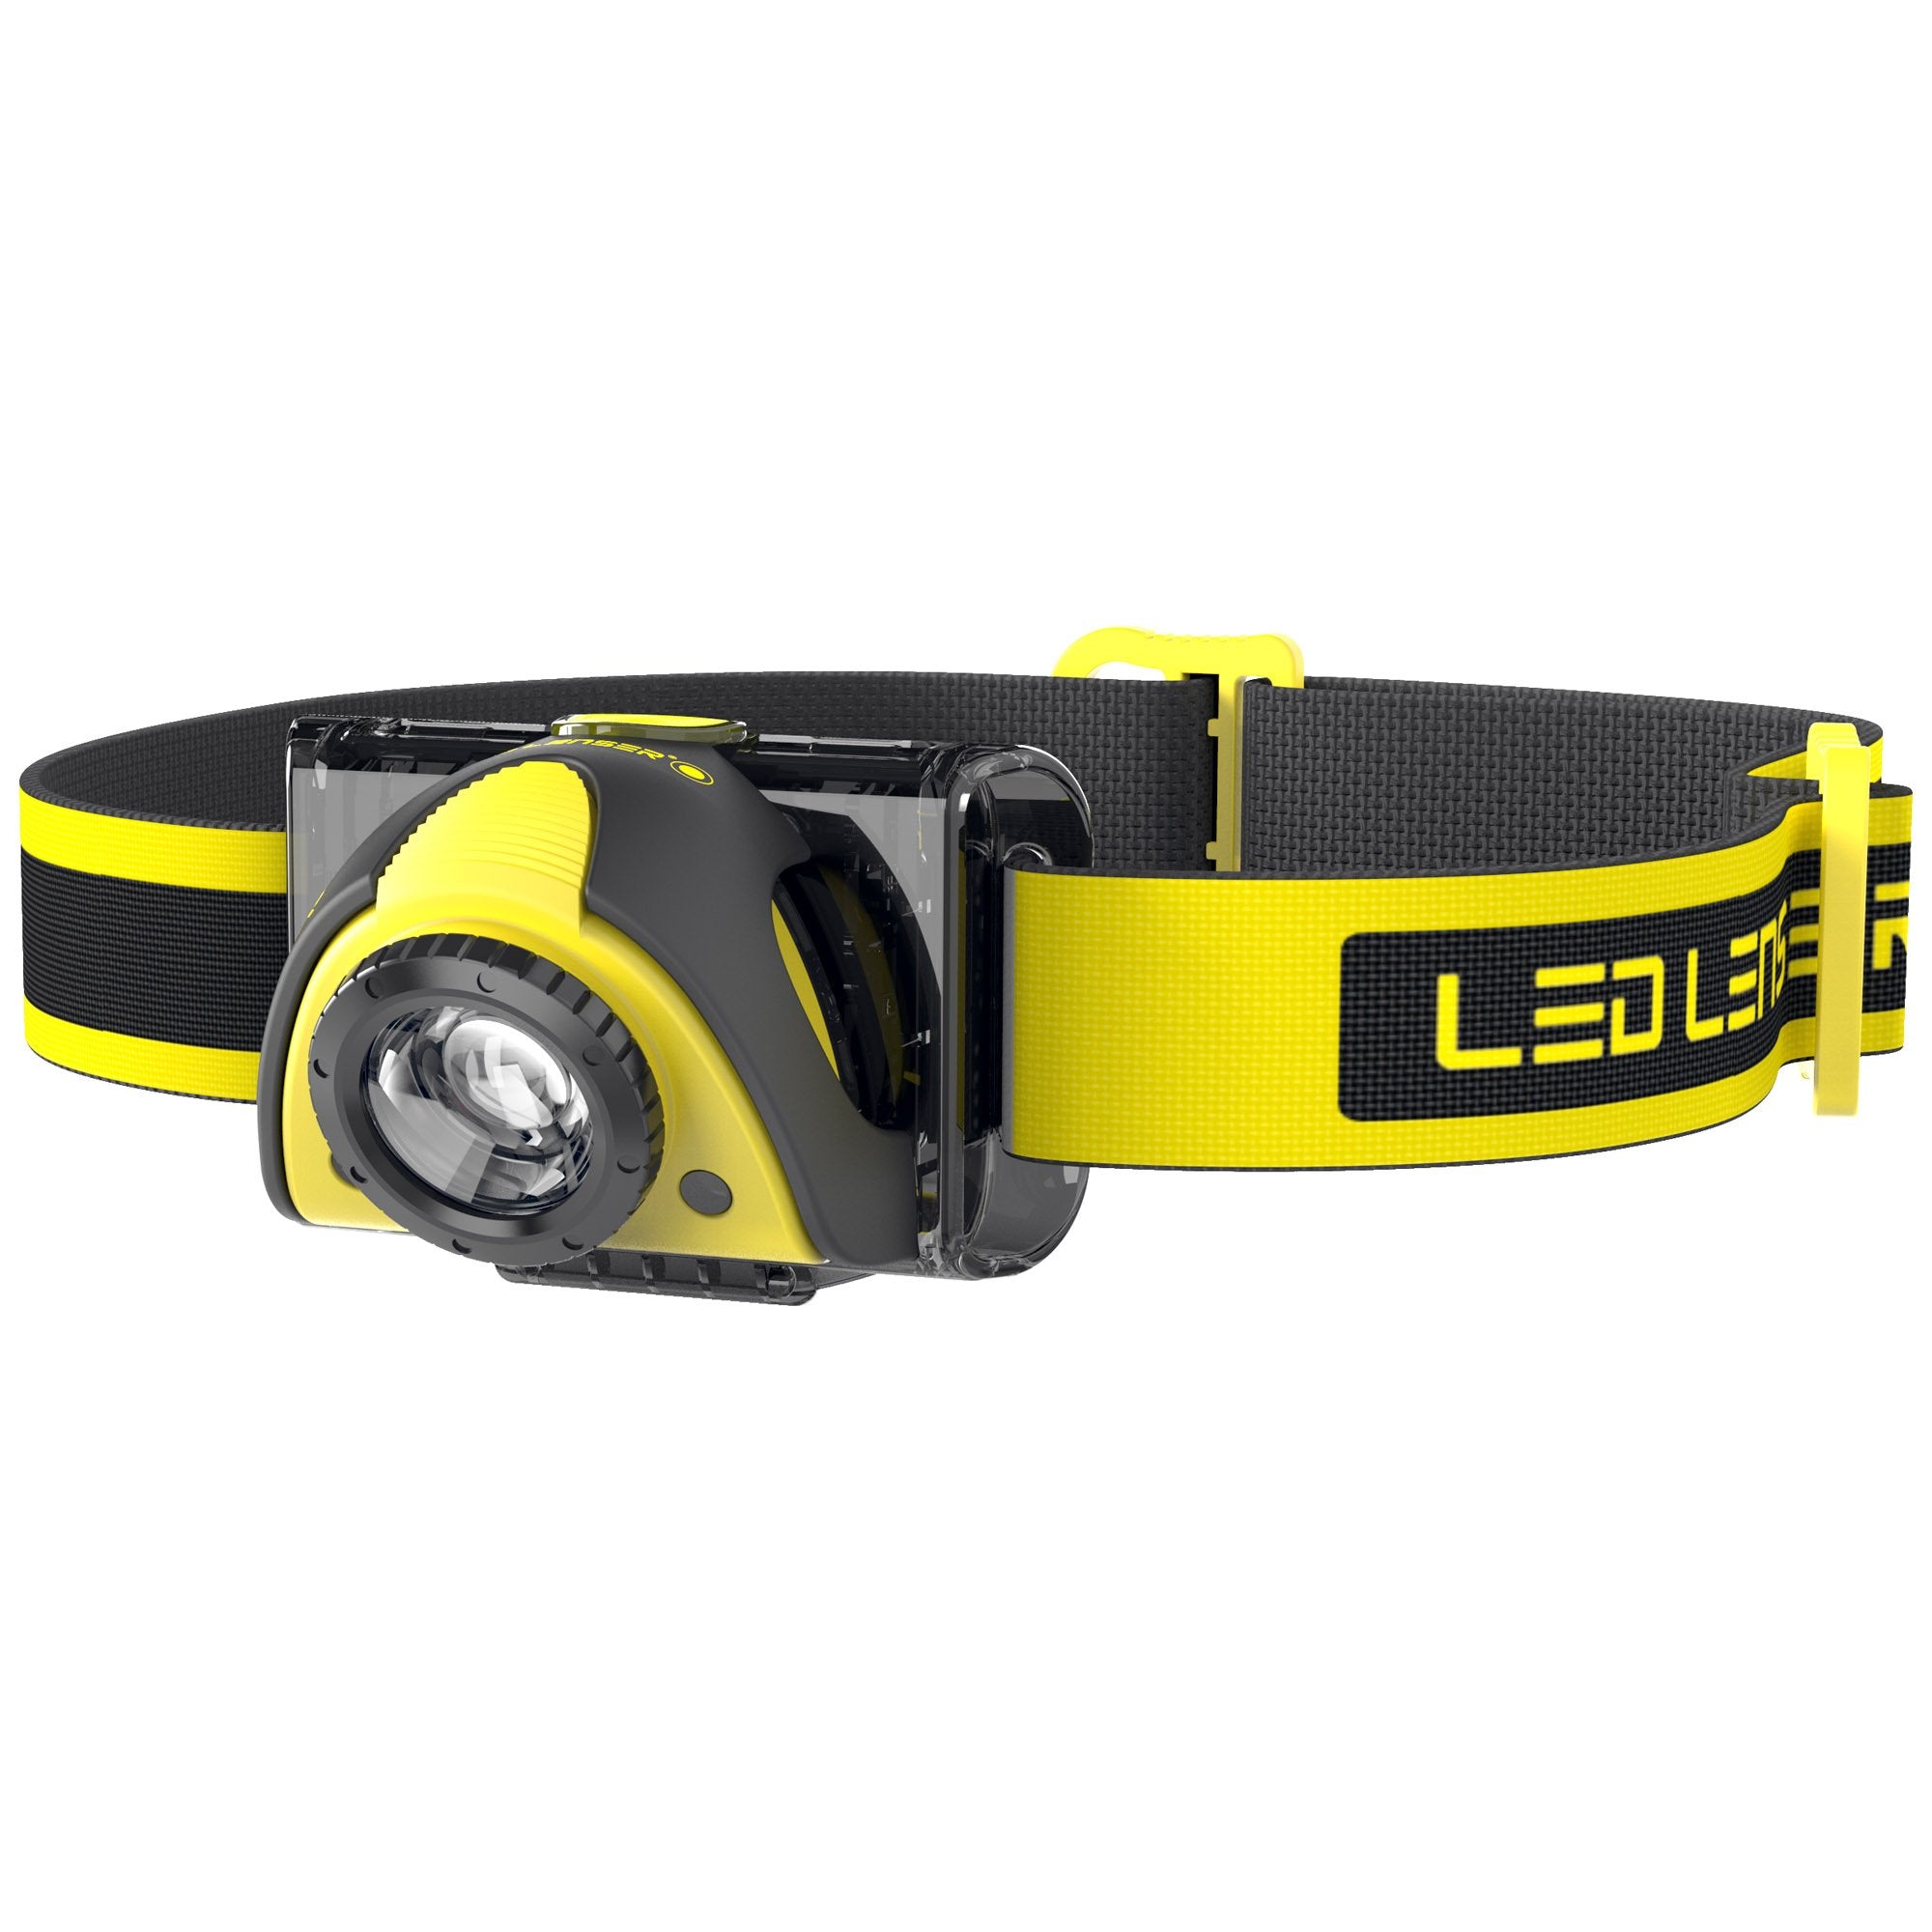 iSEO5R Rechargeable Headlamp